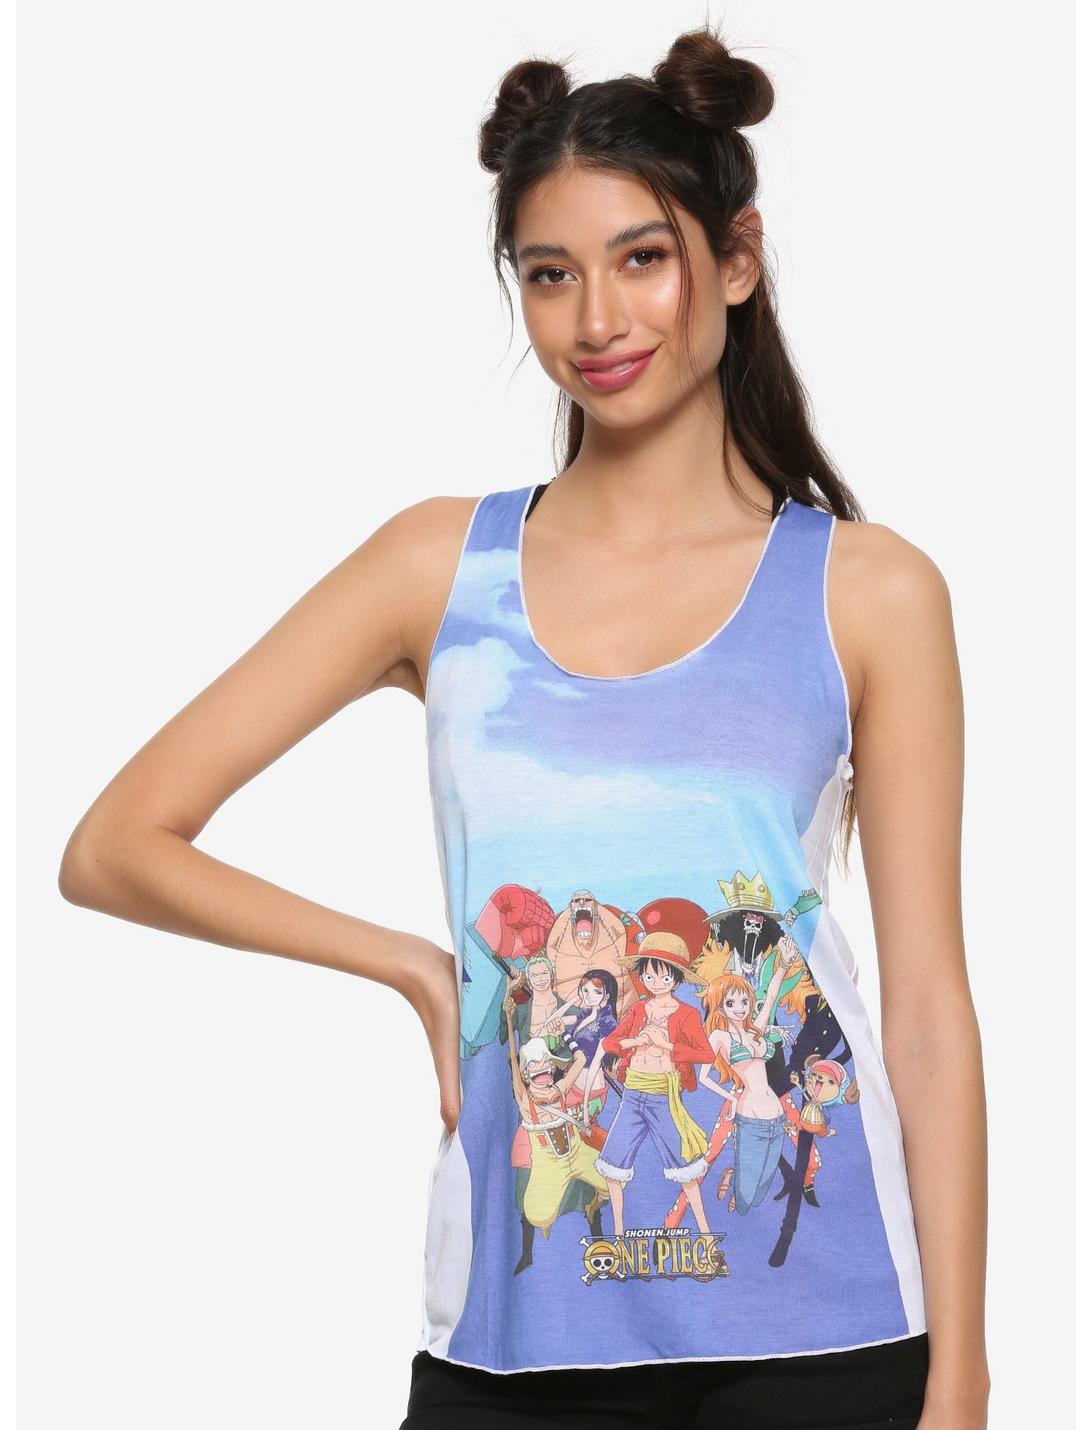 One Piece Group Girls Tank Top, MULTI, hi-res